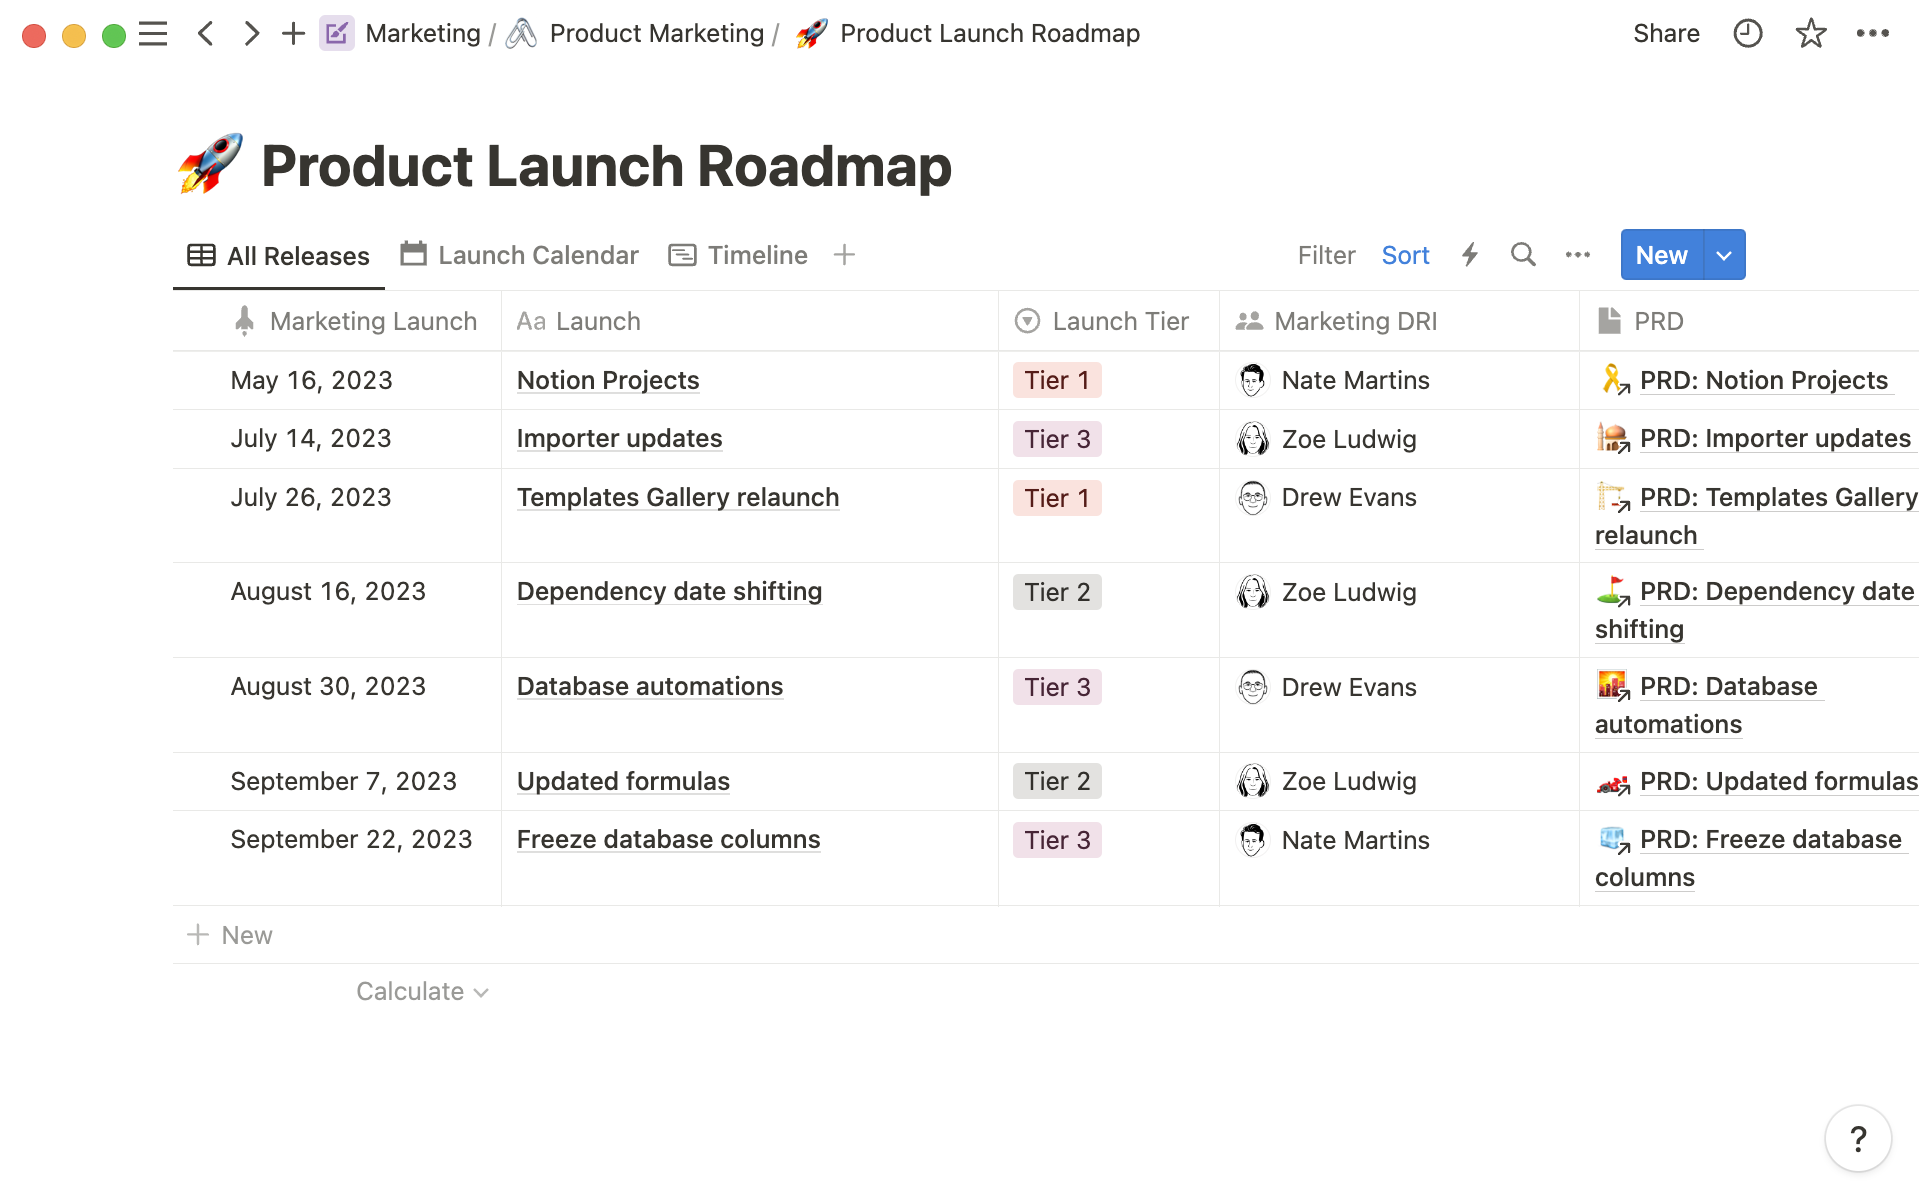 A product launch roadmap that helps keep Product Marketing aligned cross-functionally.